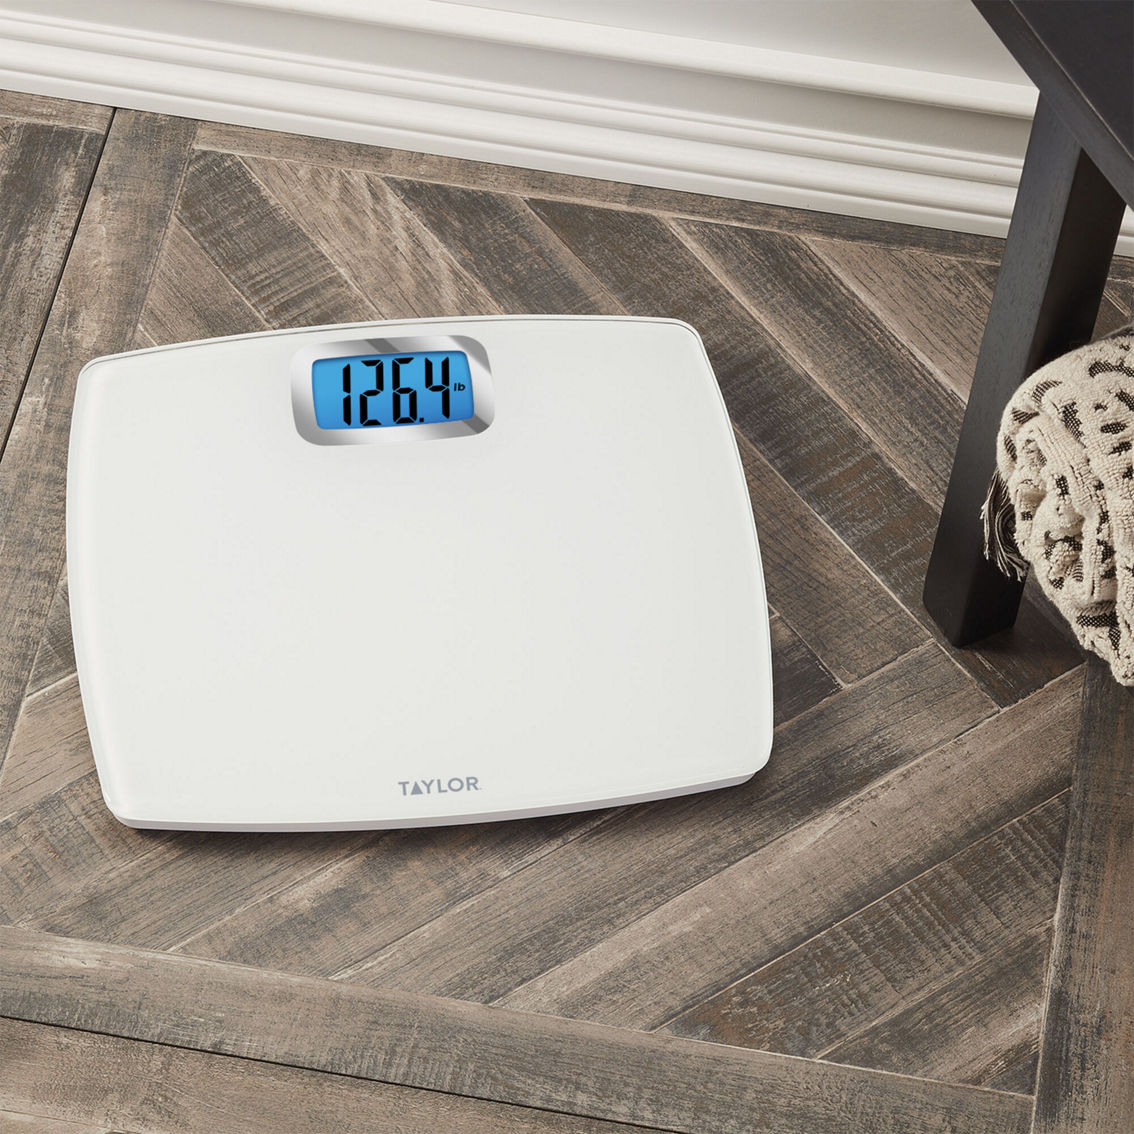 Taylor Pure White Digital Bathroom Scale - Image 5 of 6